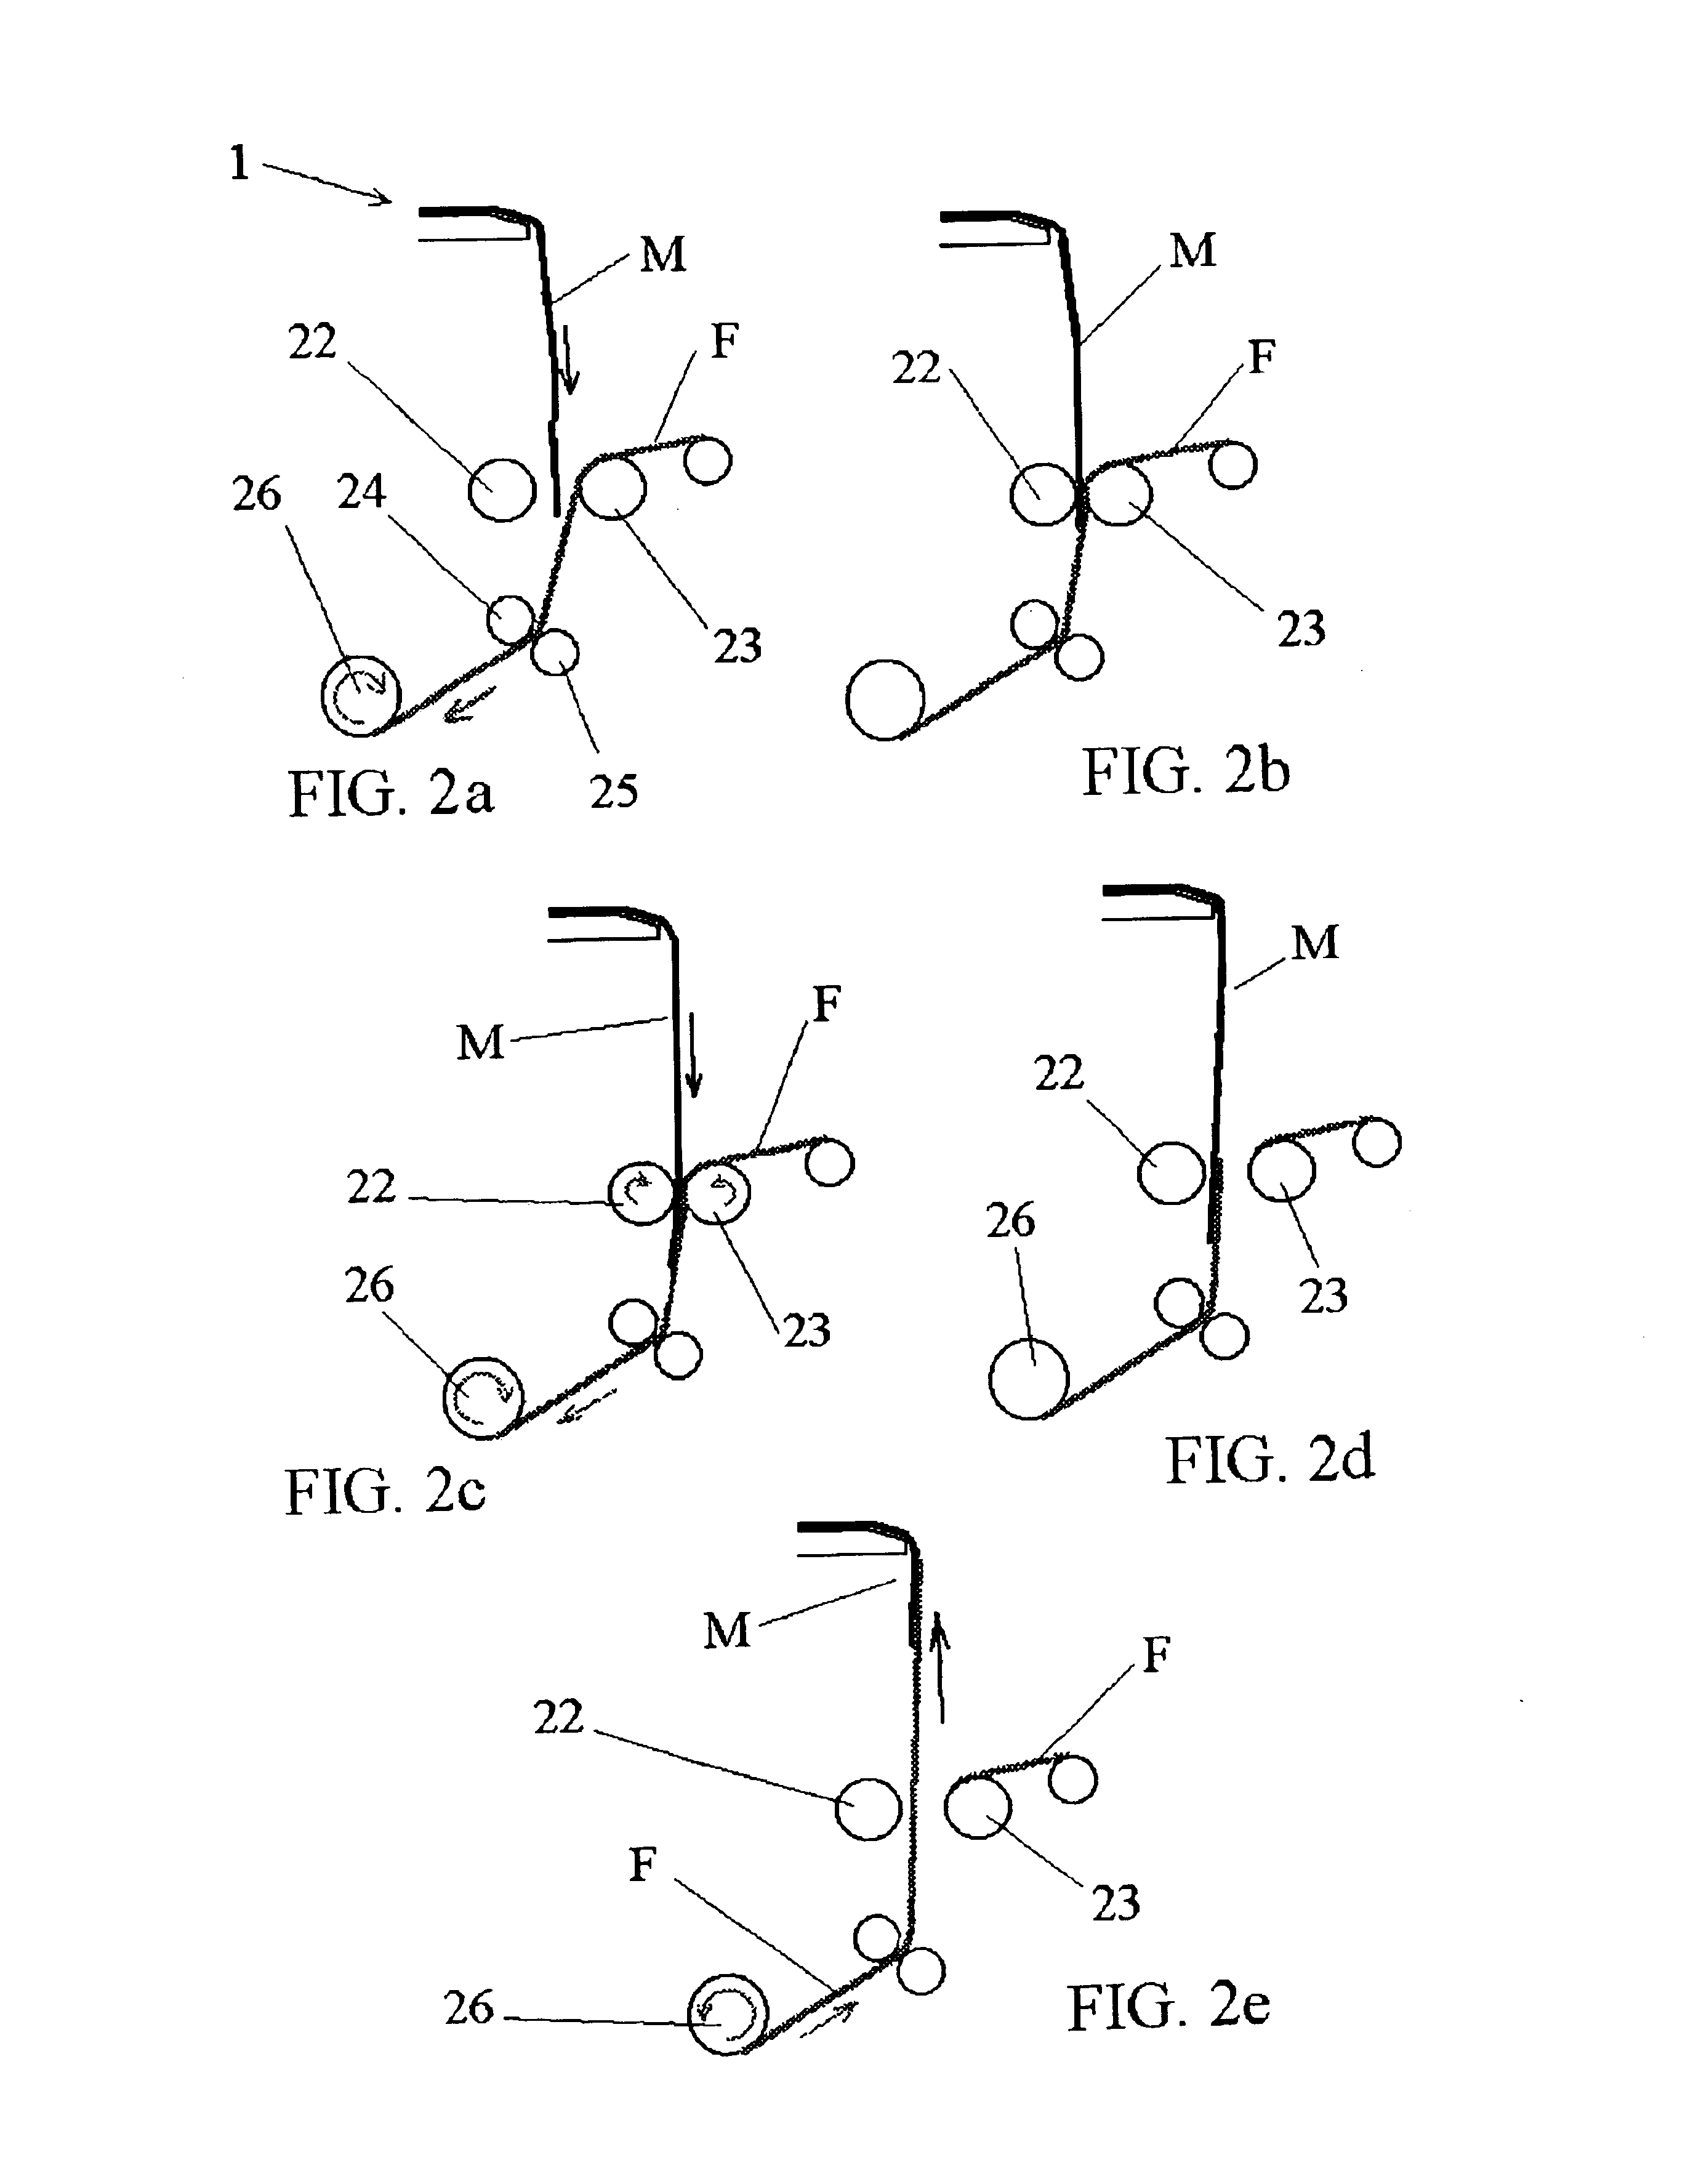 Printing apparatus and a method for loading media in said apparatus